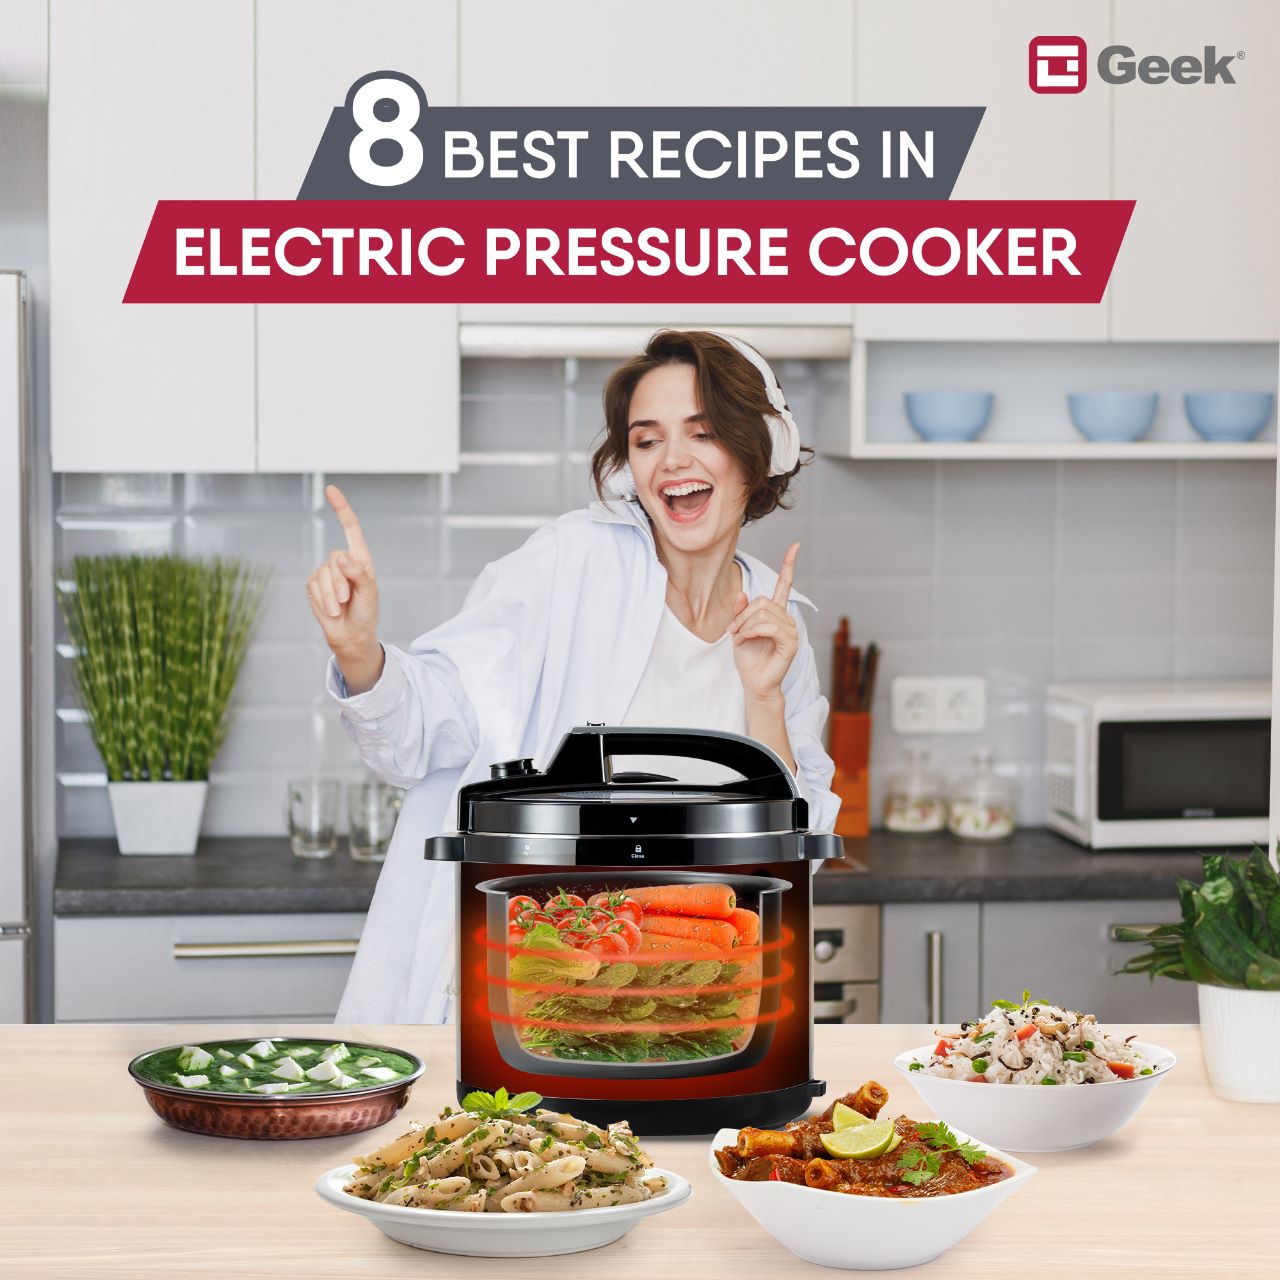 Hacking Electric Pressure Cookers - Make